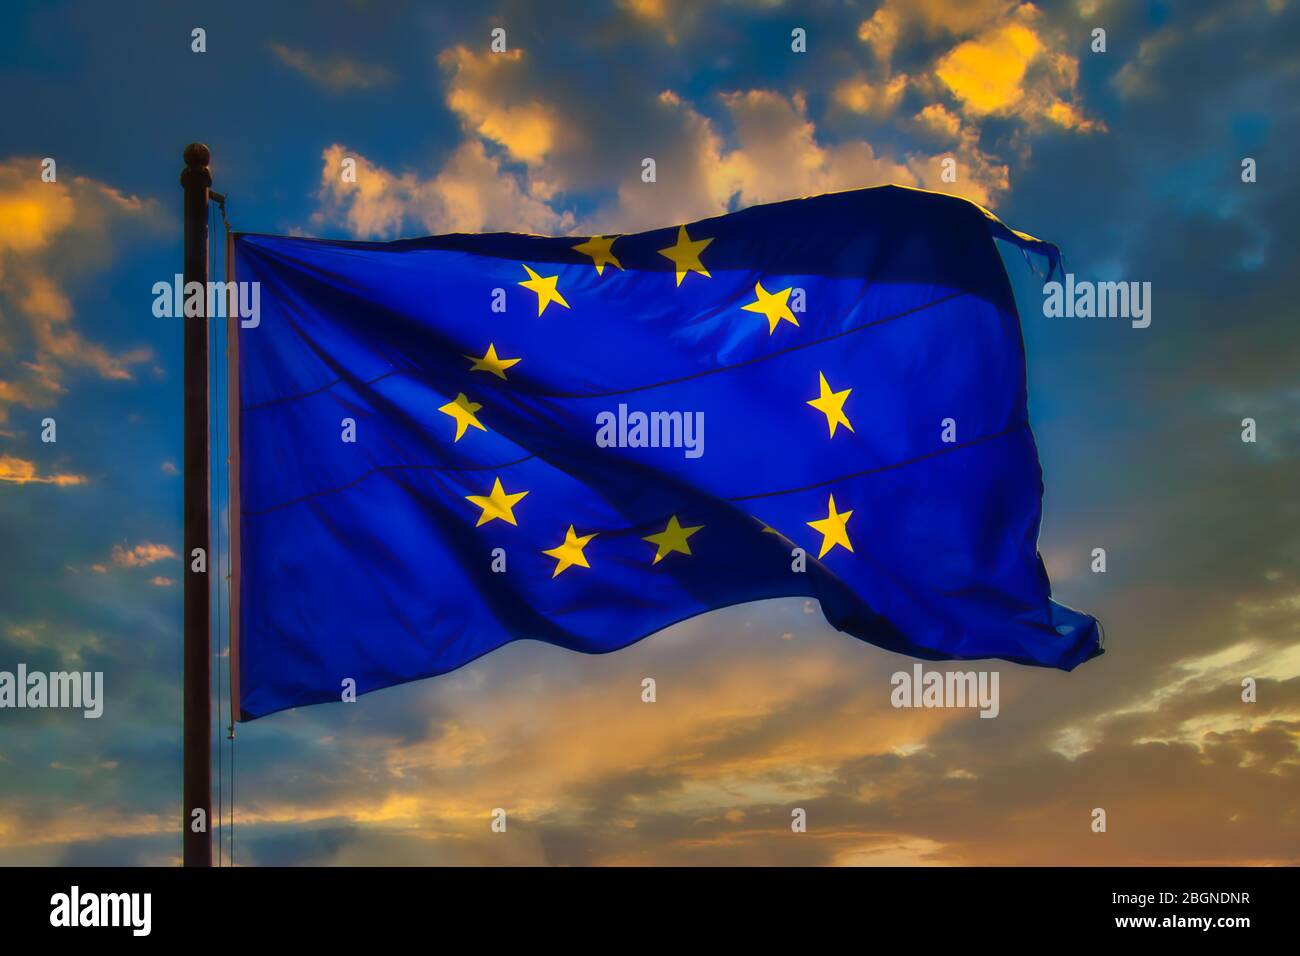 The European Union (EU) flag flies in the wind at sunset Stock Photo